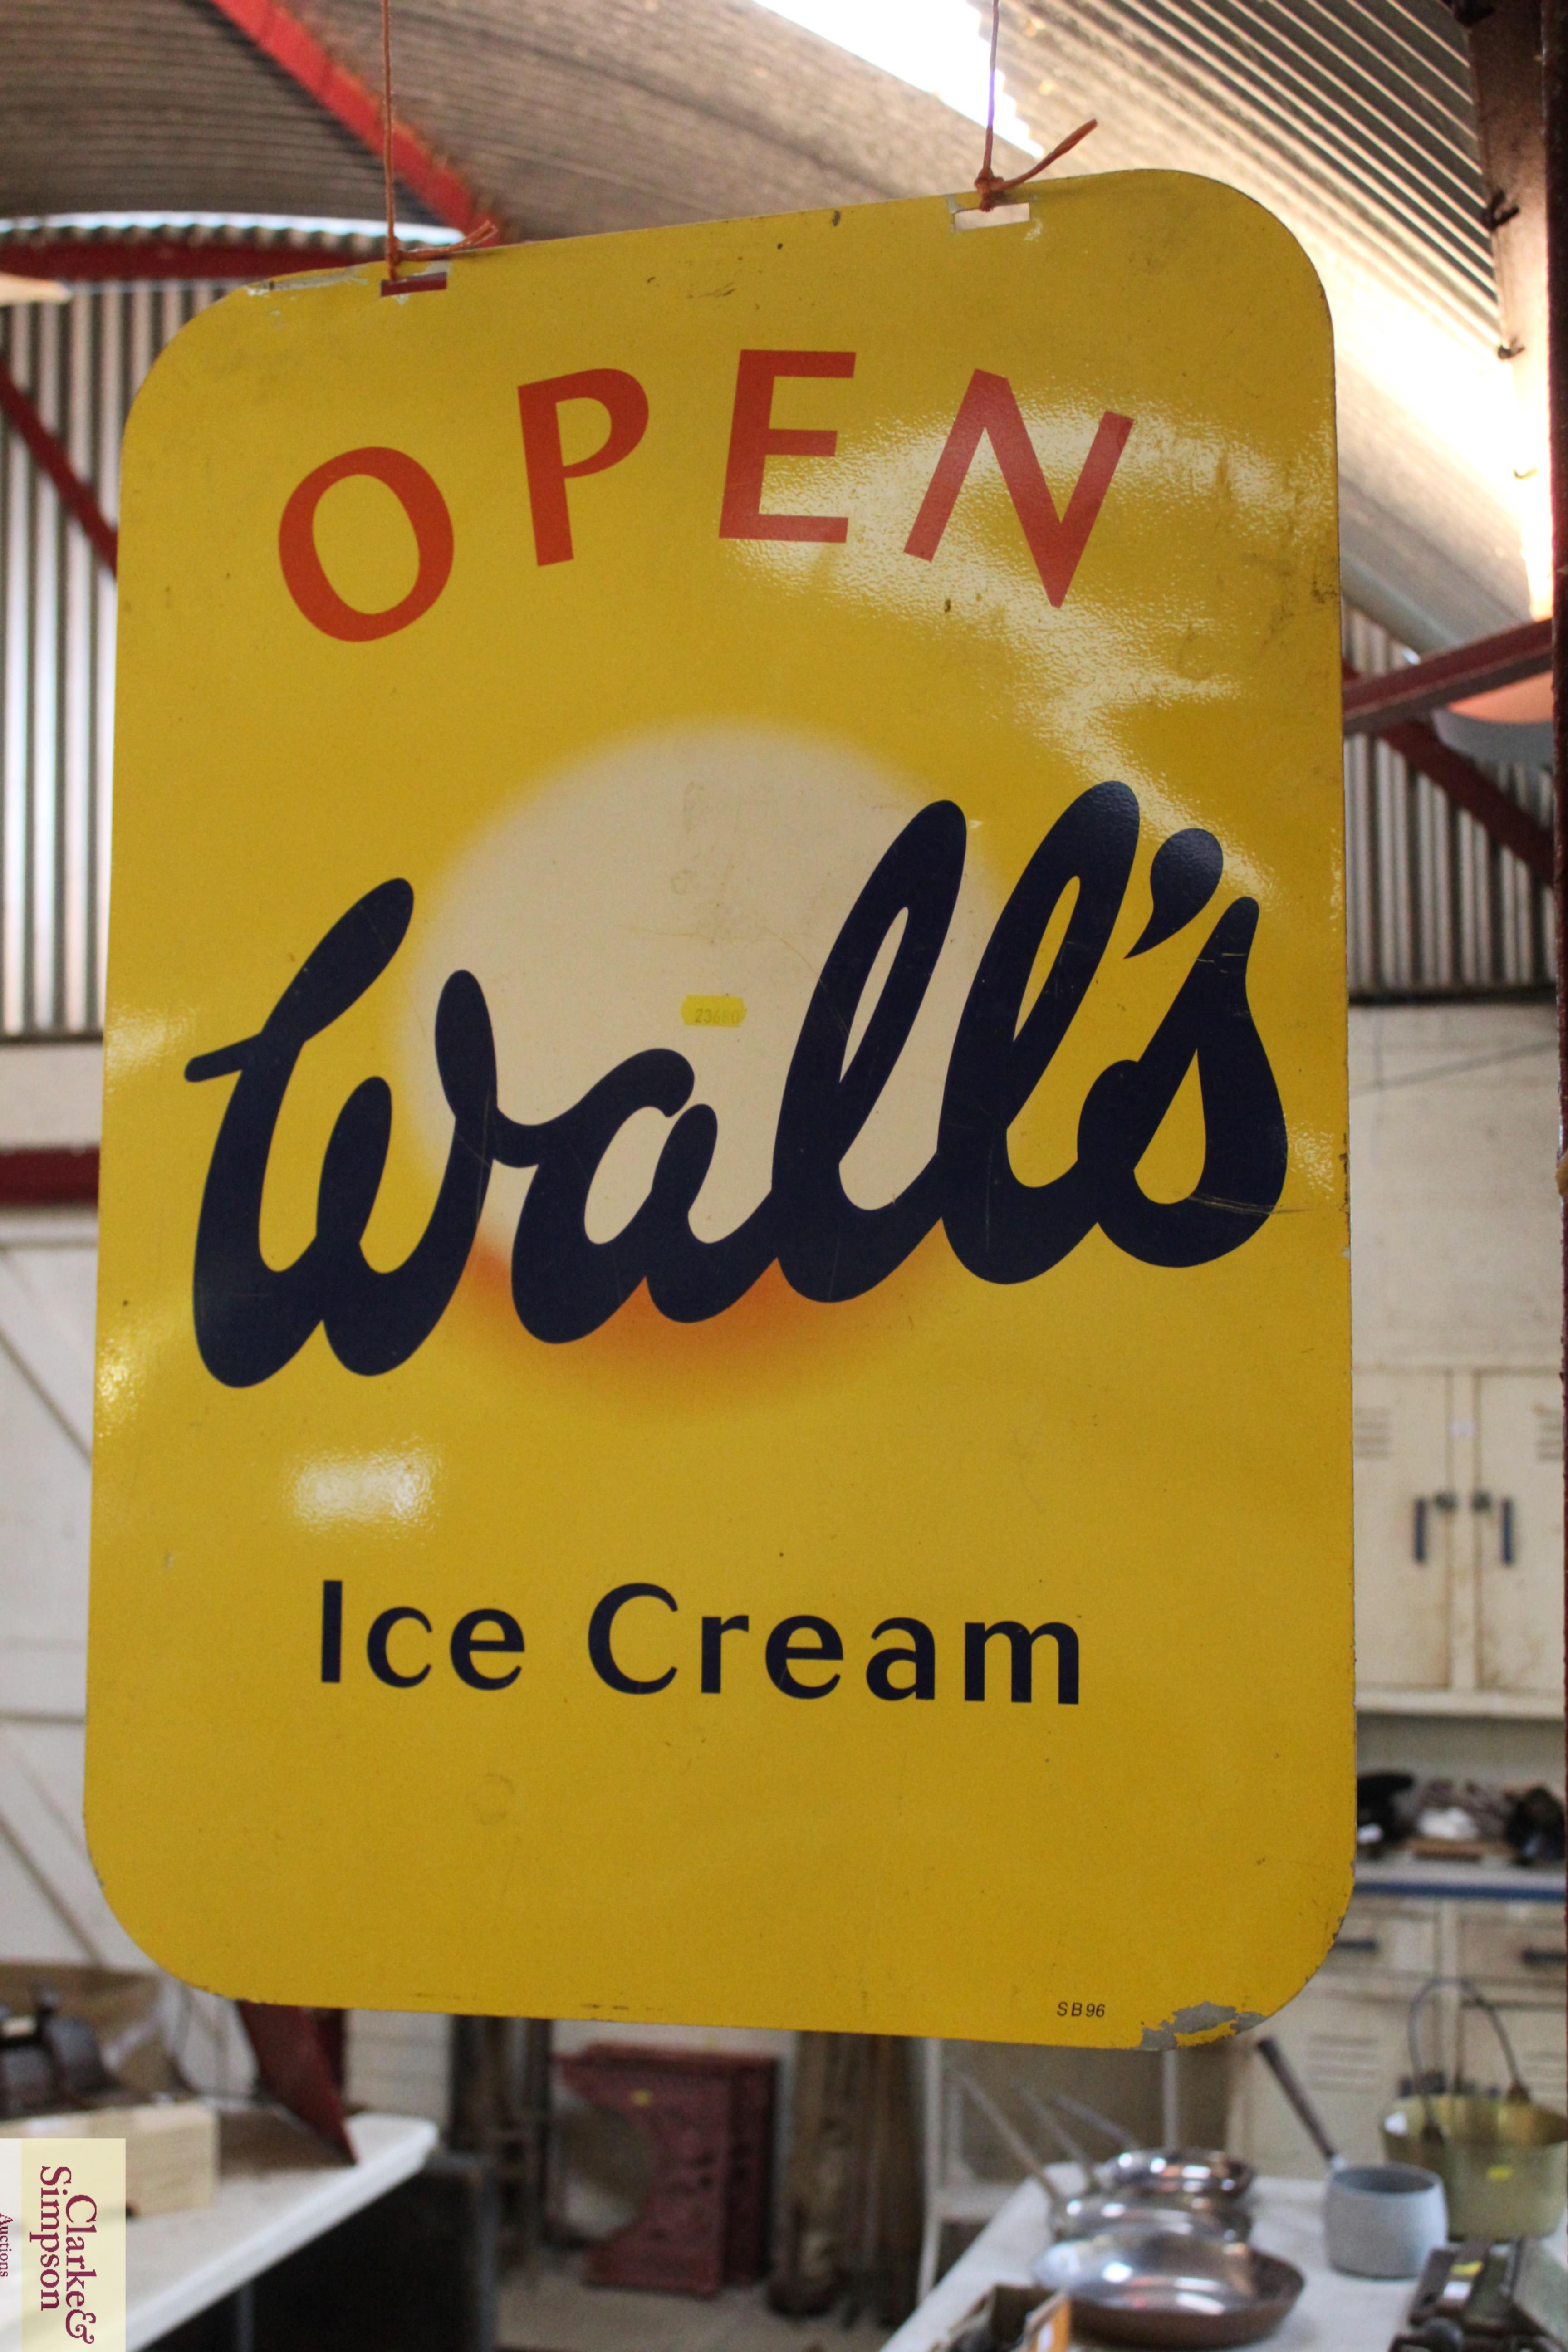 A "Walls Ice Cream" open double sided sign - Image 2 of 2